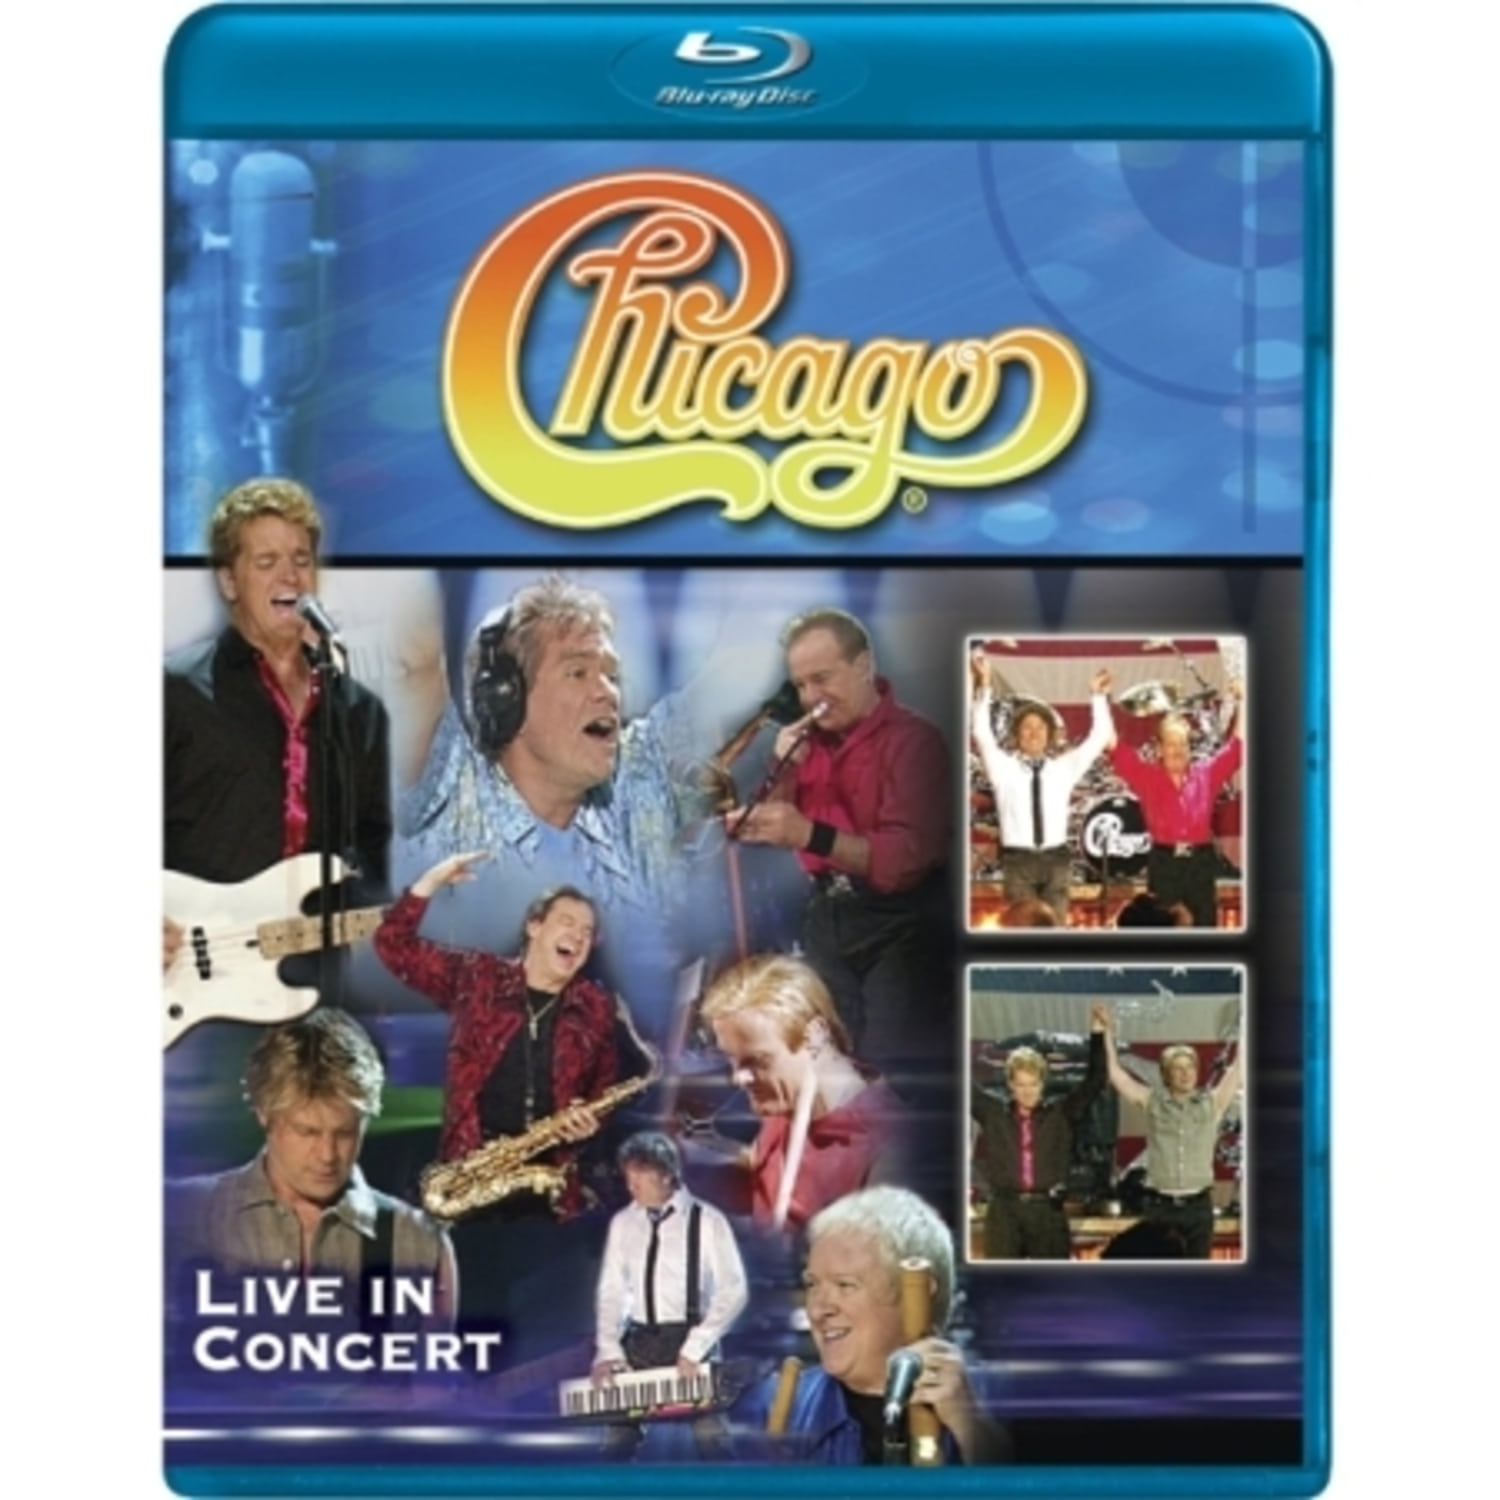 CHICAGO - LIVE IN CONCERT (1 DISC)